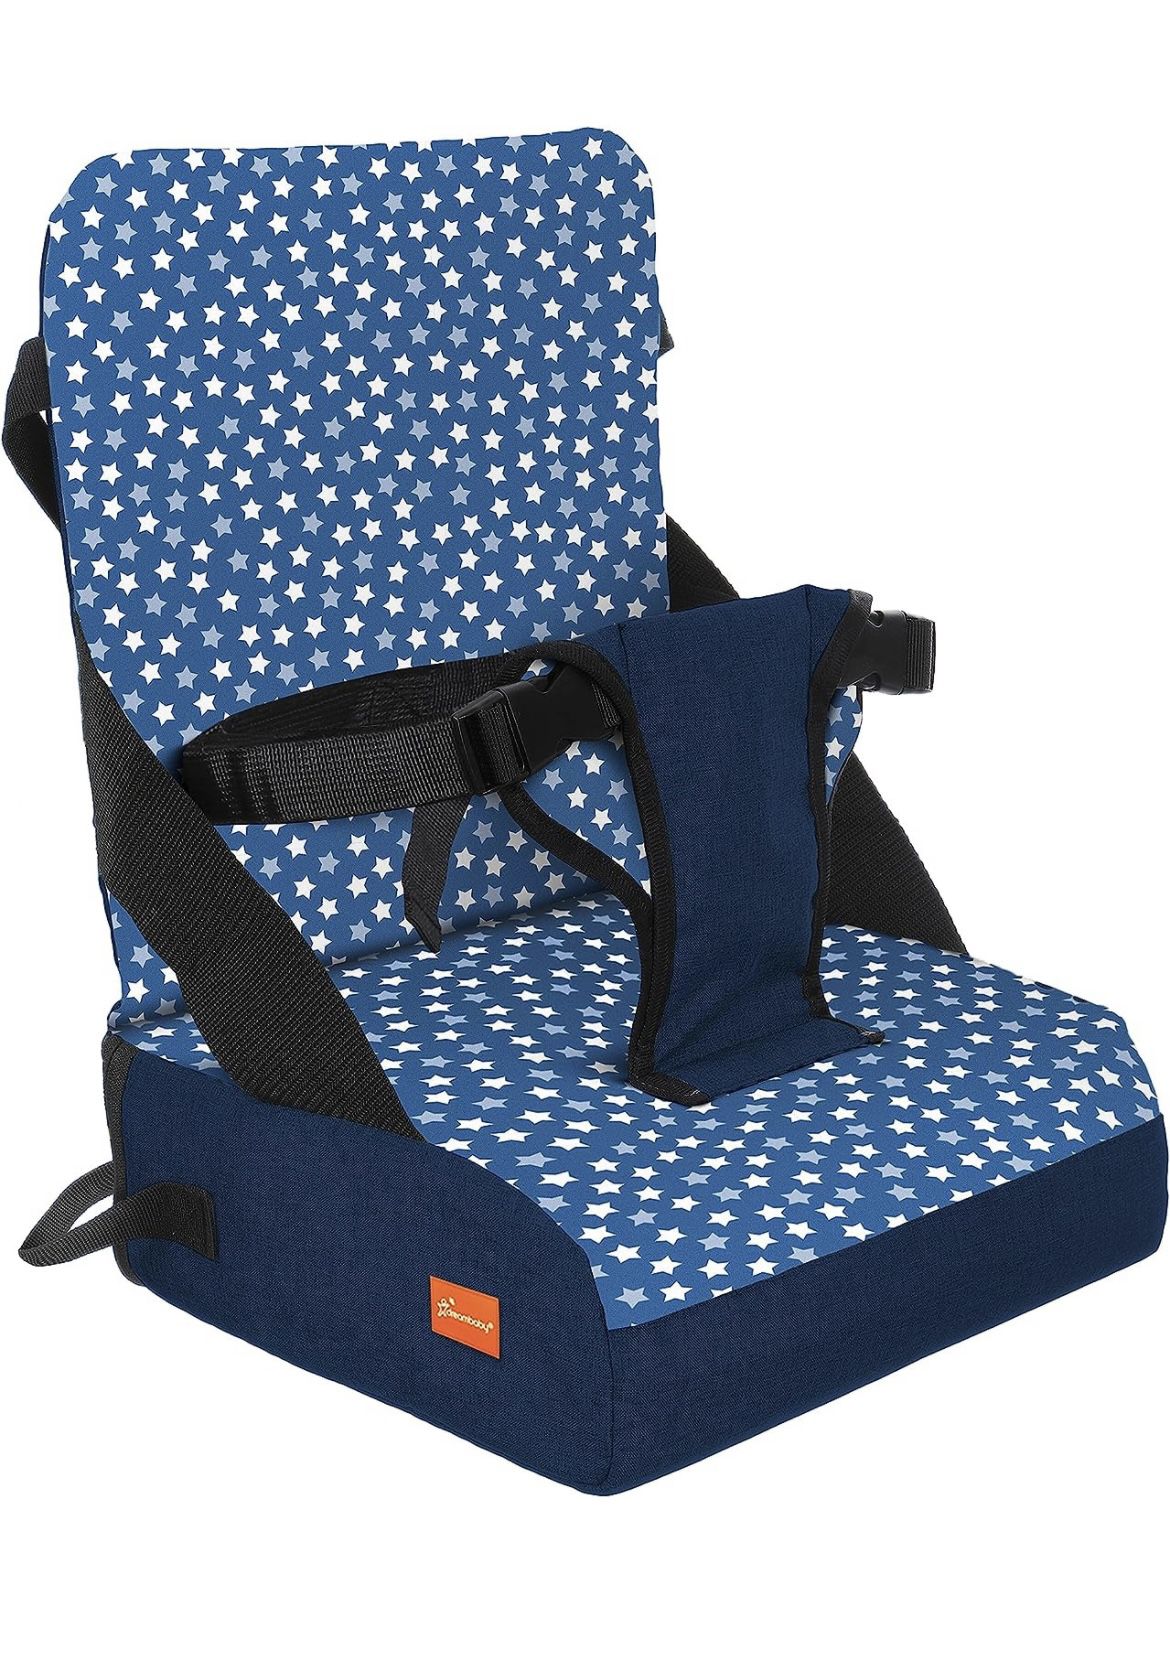 Dreambaby Grab 'n Go Travel Booster Seat with Storage Compartment, Tall Back for Added Comfort